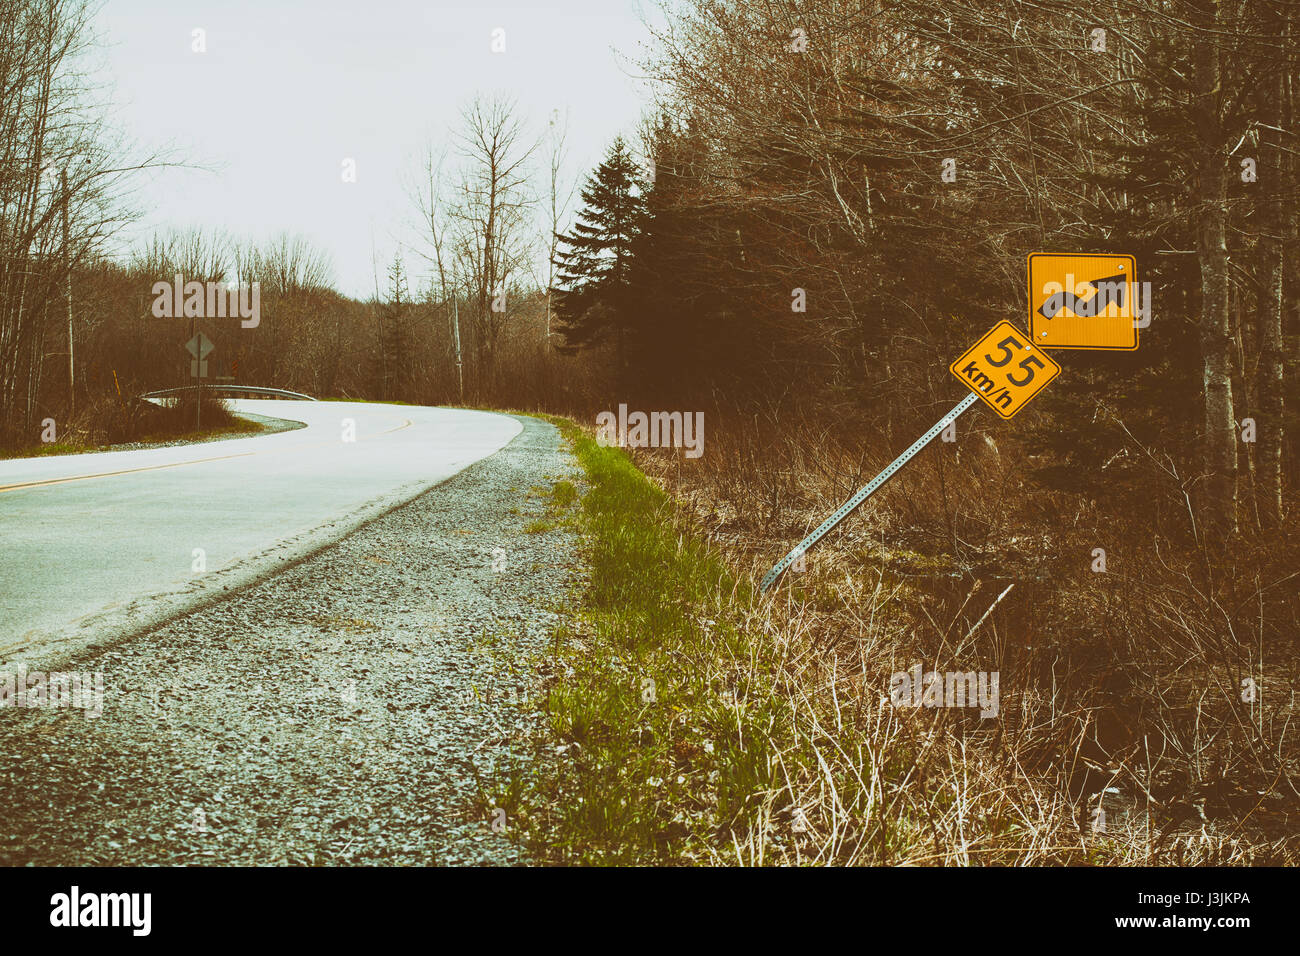 Bent over speed limit sign beside rural road. Grunge look applied. Stock Photo